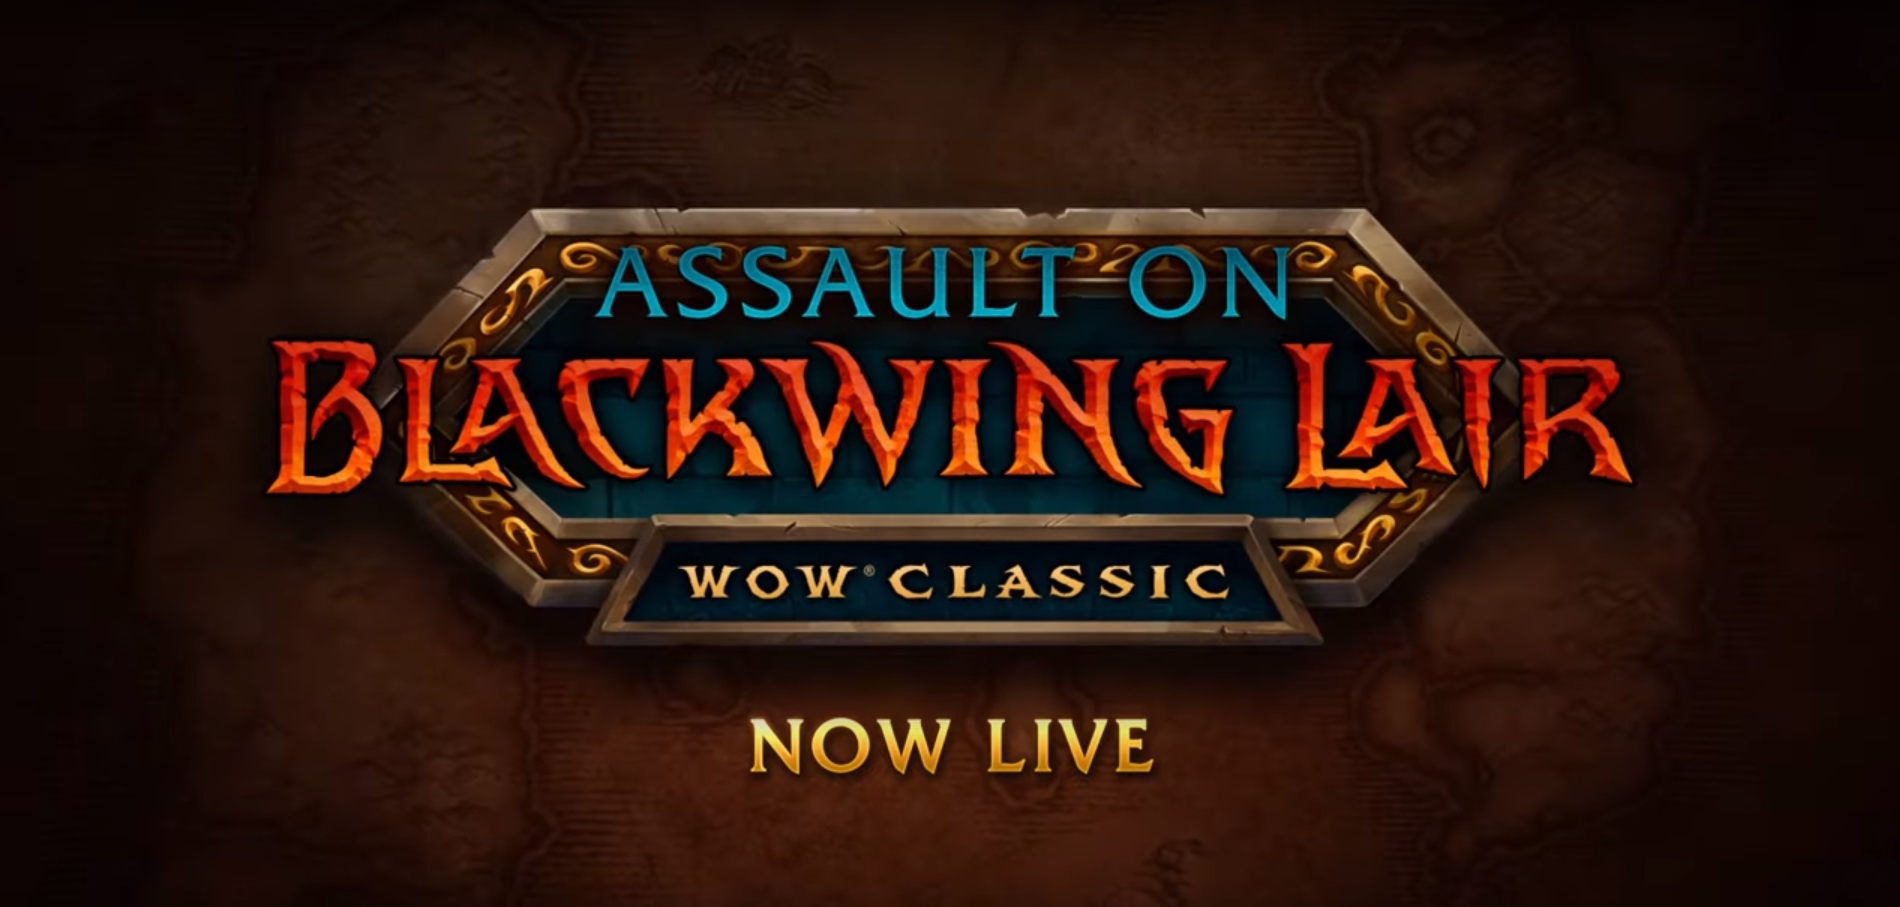 Blackwing Lair Raid Is Now Live On World Of Warcraft: Classic!